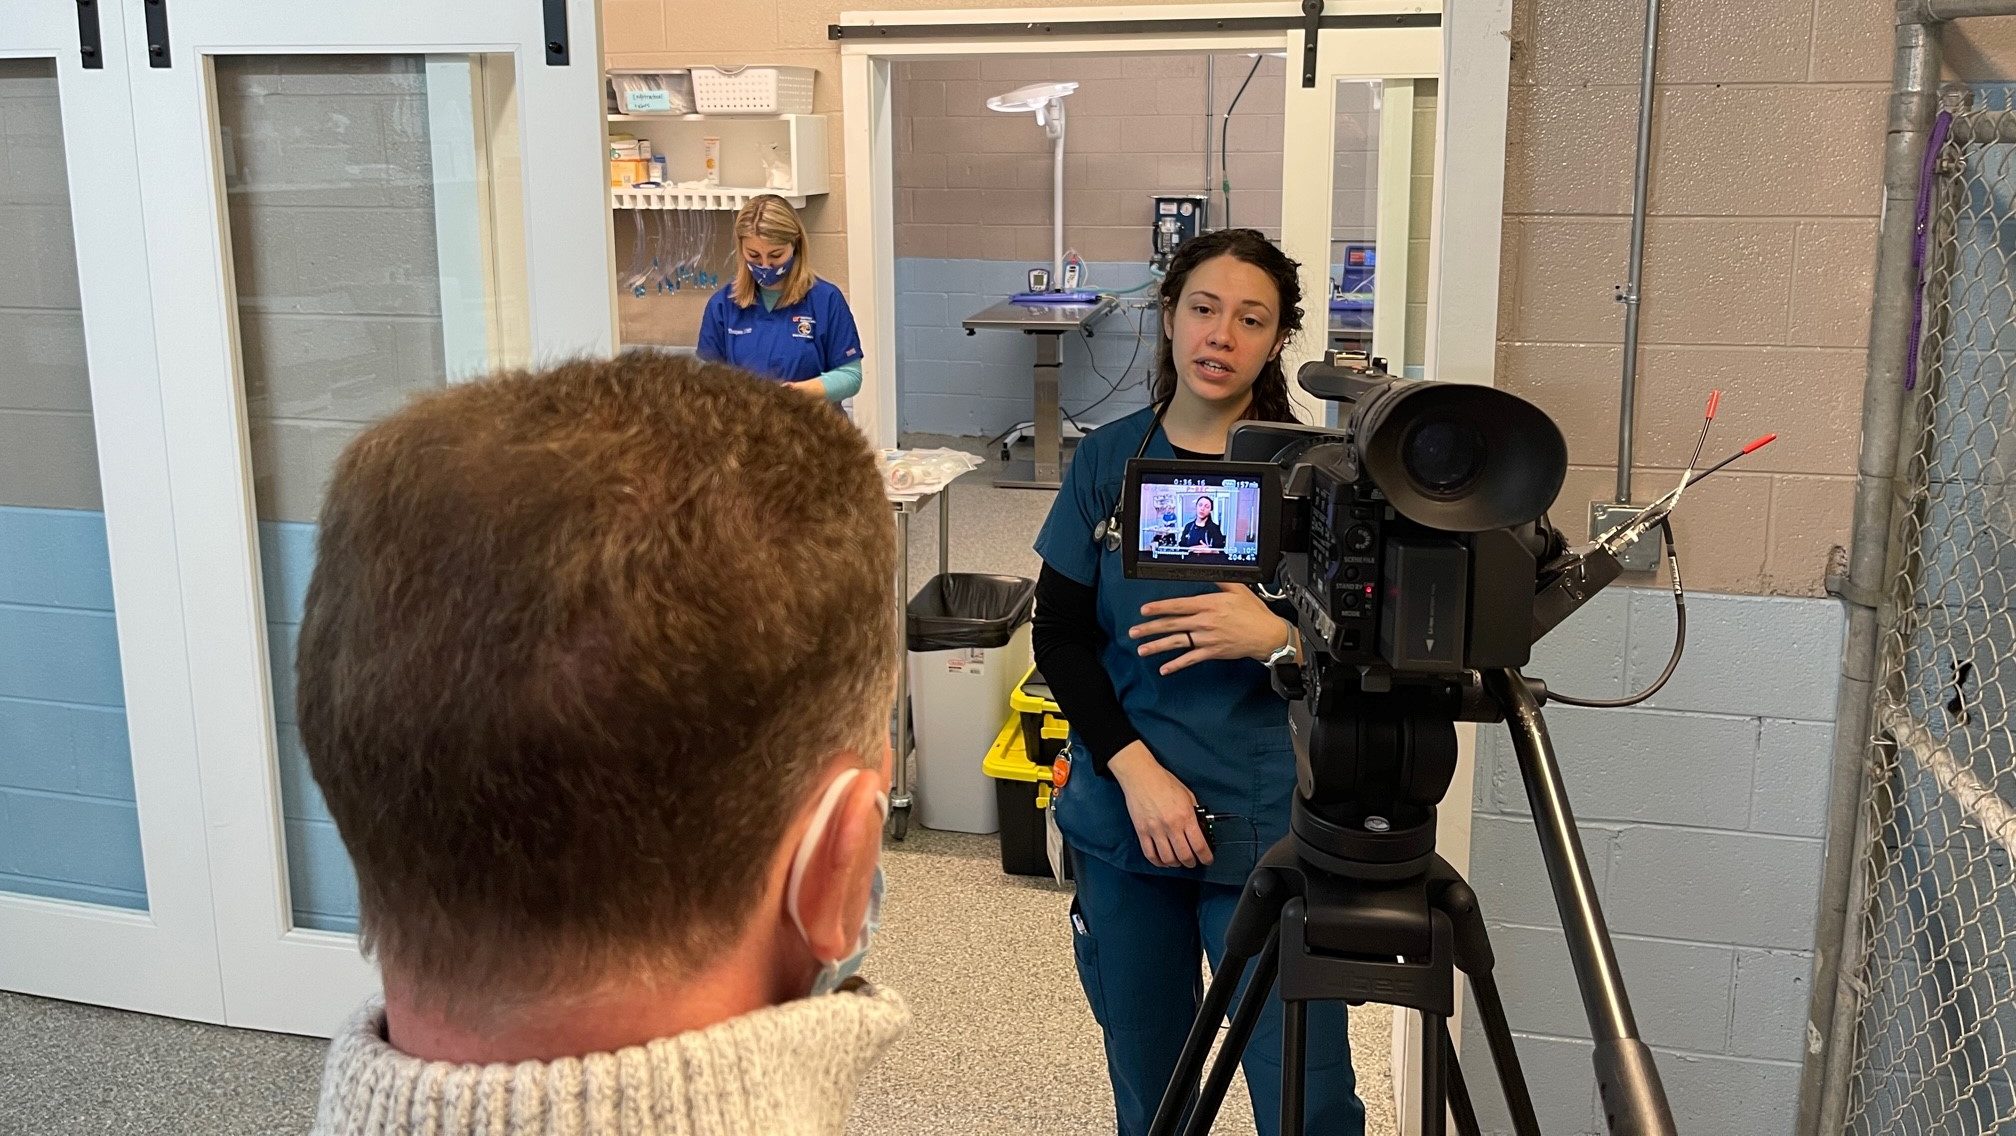 Veterinary student being interviewed on camera at an animal shelter